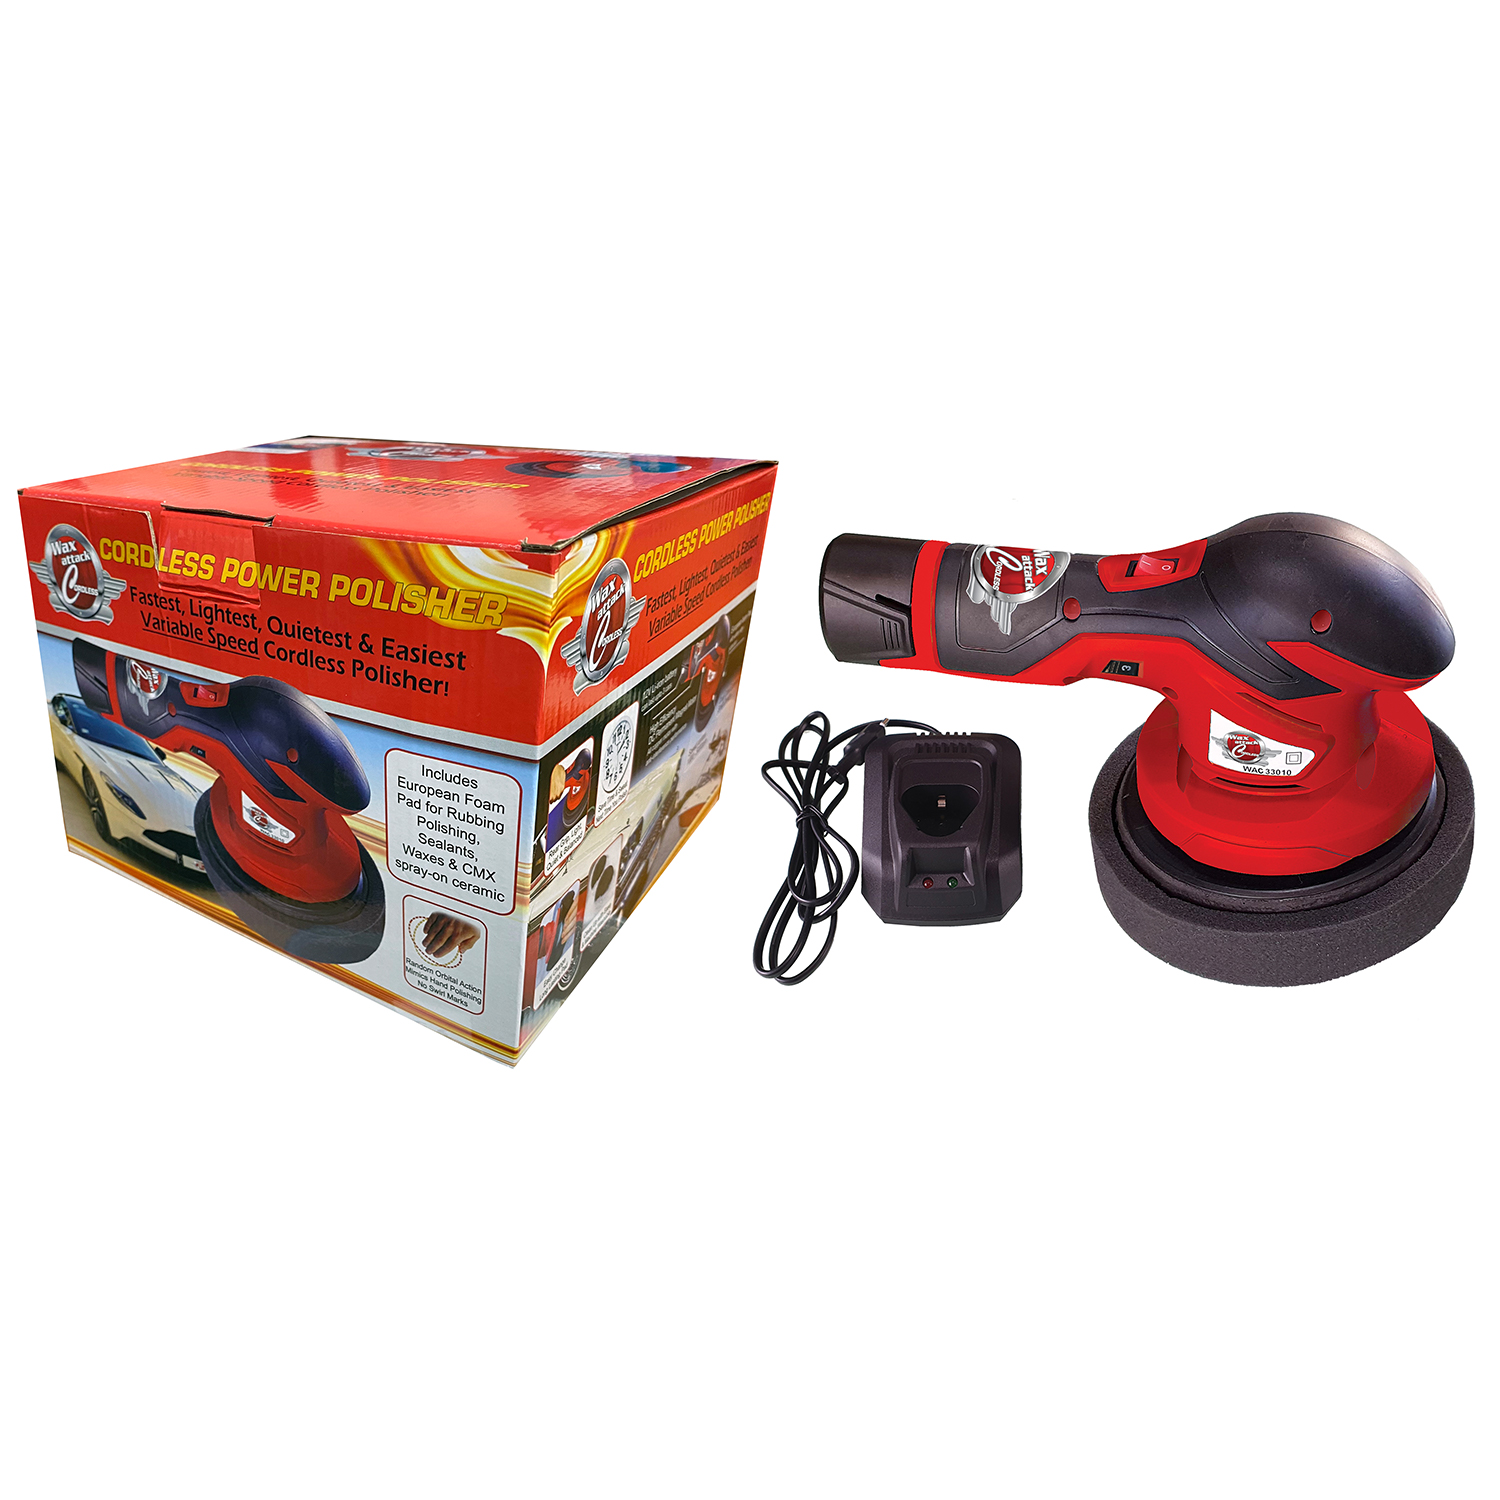 Mothers Wax Attack Cordless Polisher